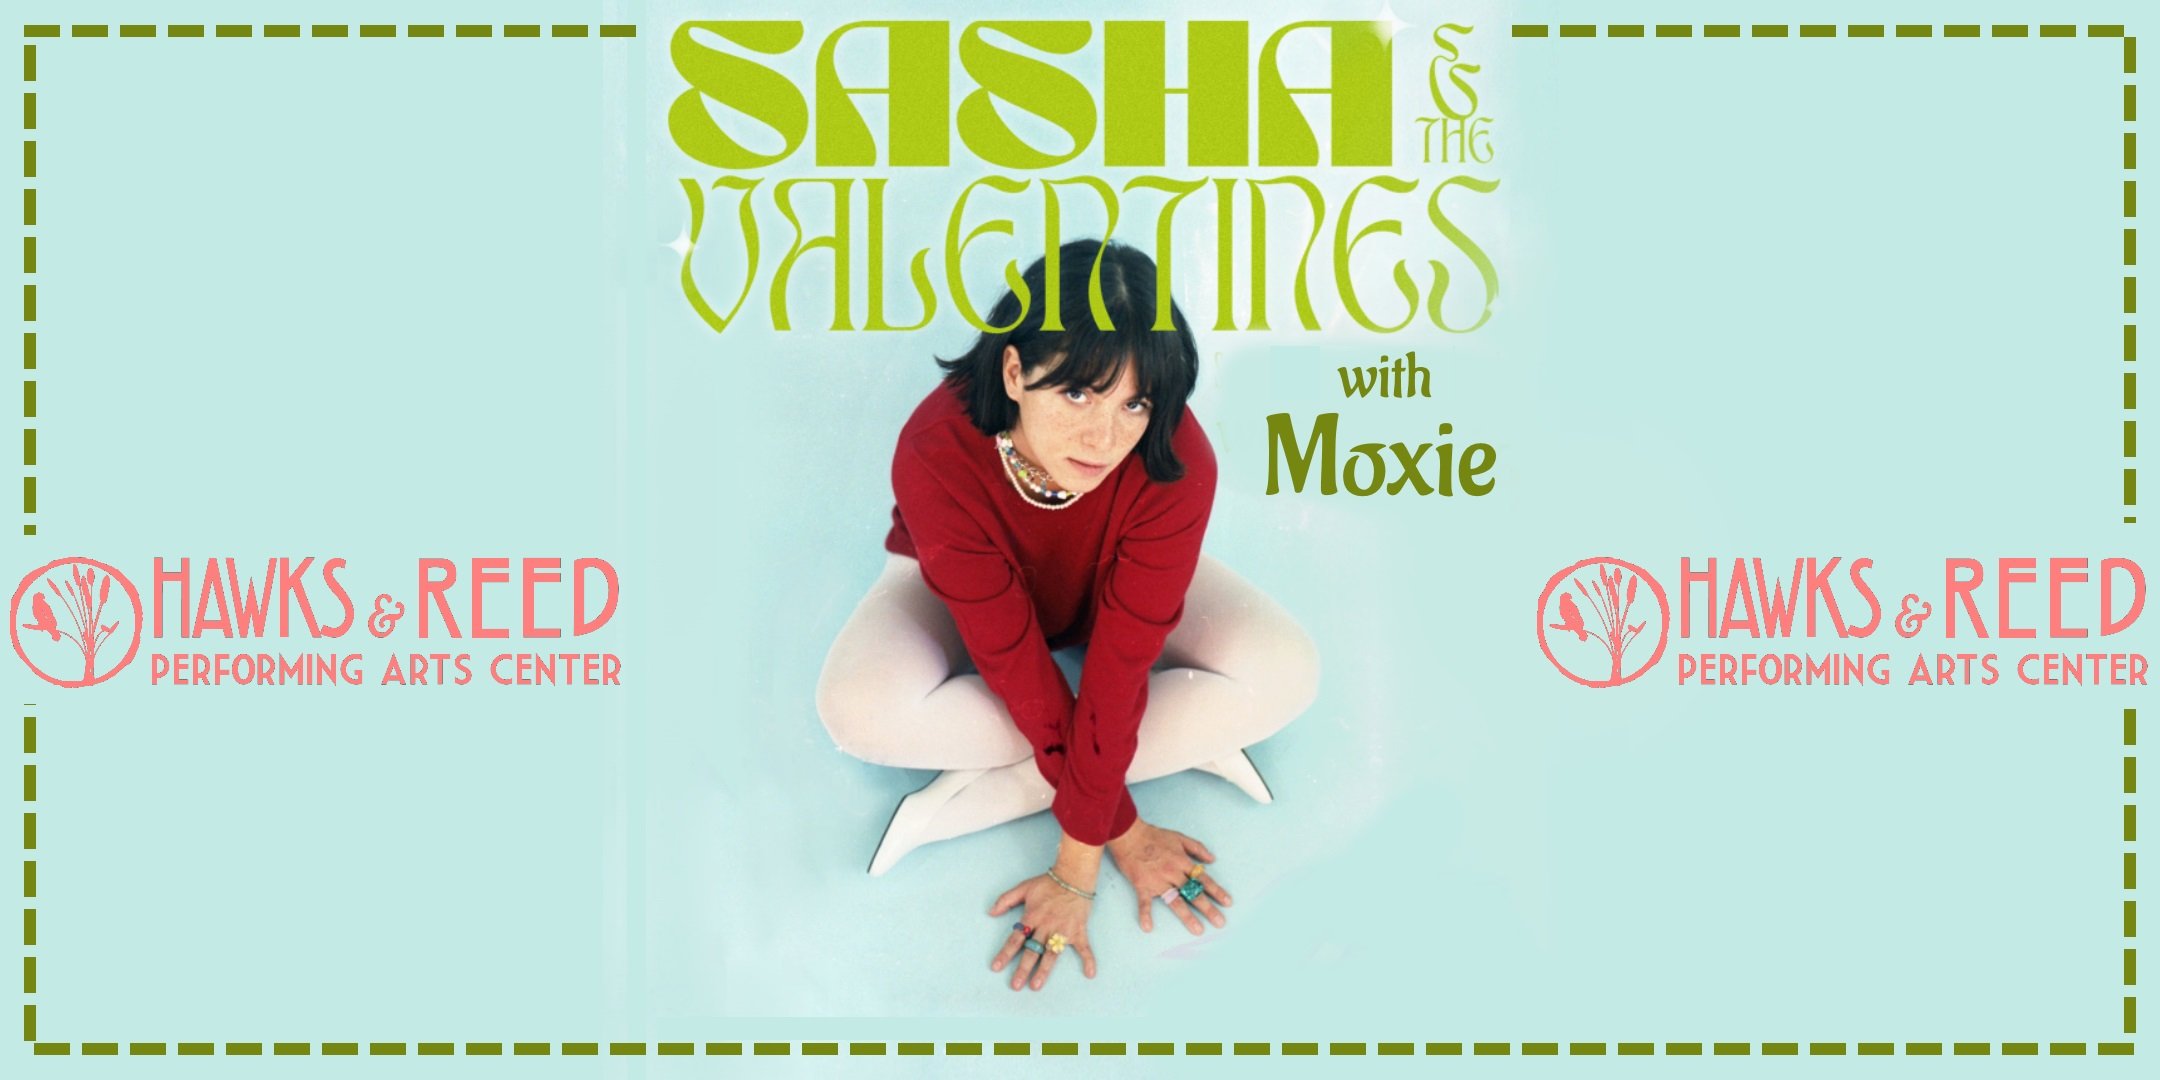 Sasha and the Valentines with Moxie at Hawks & Reed